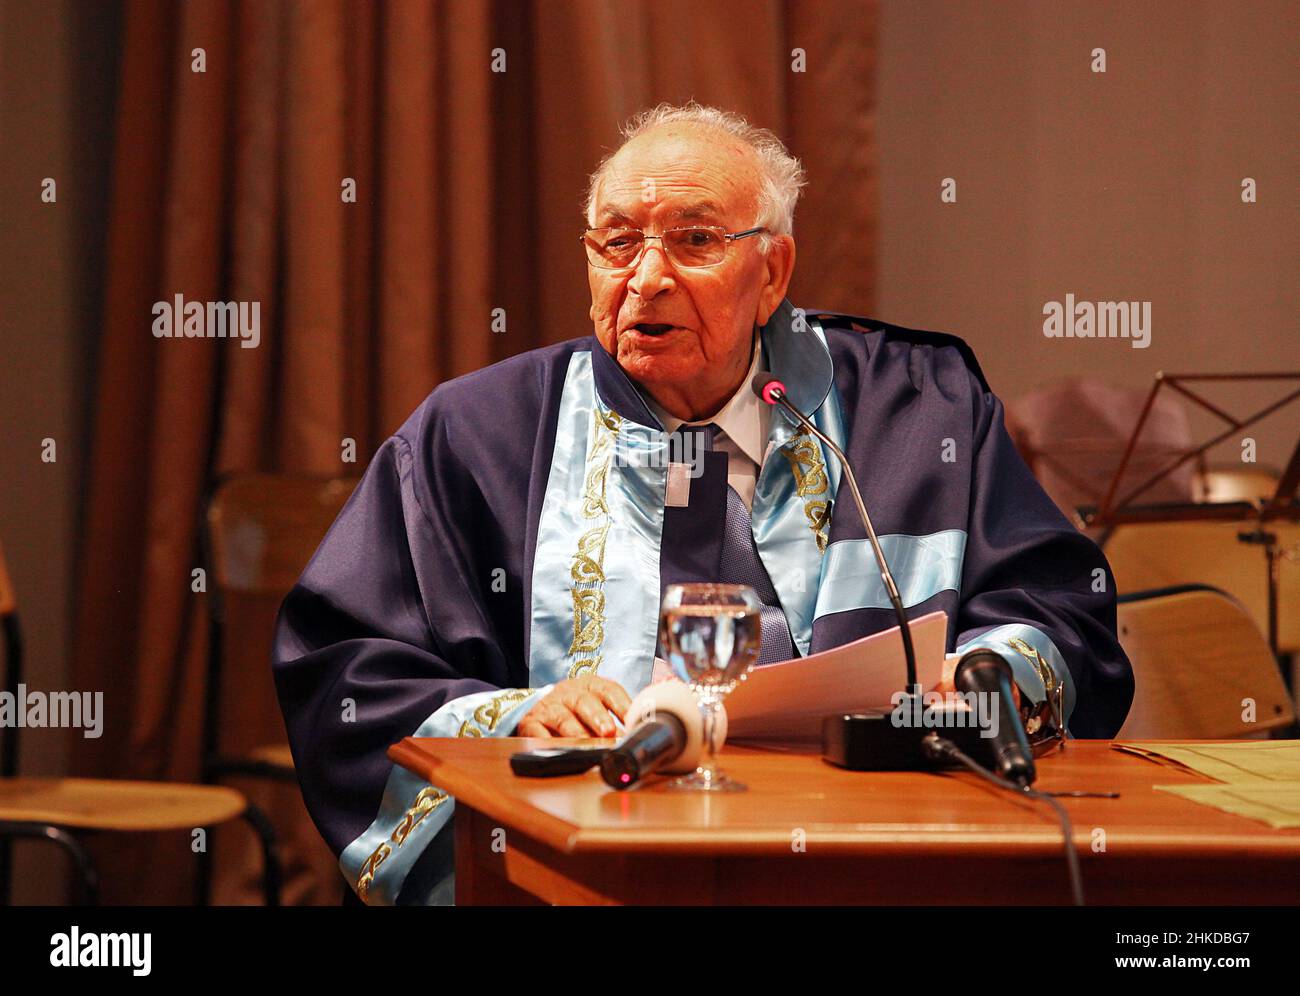 ISTANBUL, TURKEY - DECEMBER 10: Turkish legendary author Yasar Kemal portrait on December 10, 2011 in Istanbul, Turkey. He is one of Turkey's leading writers. Stock Photo